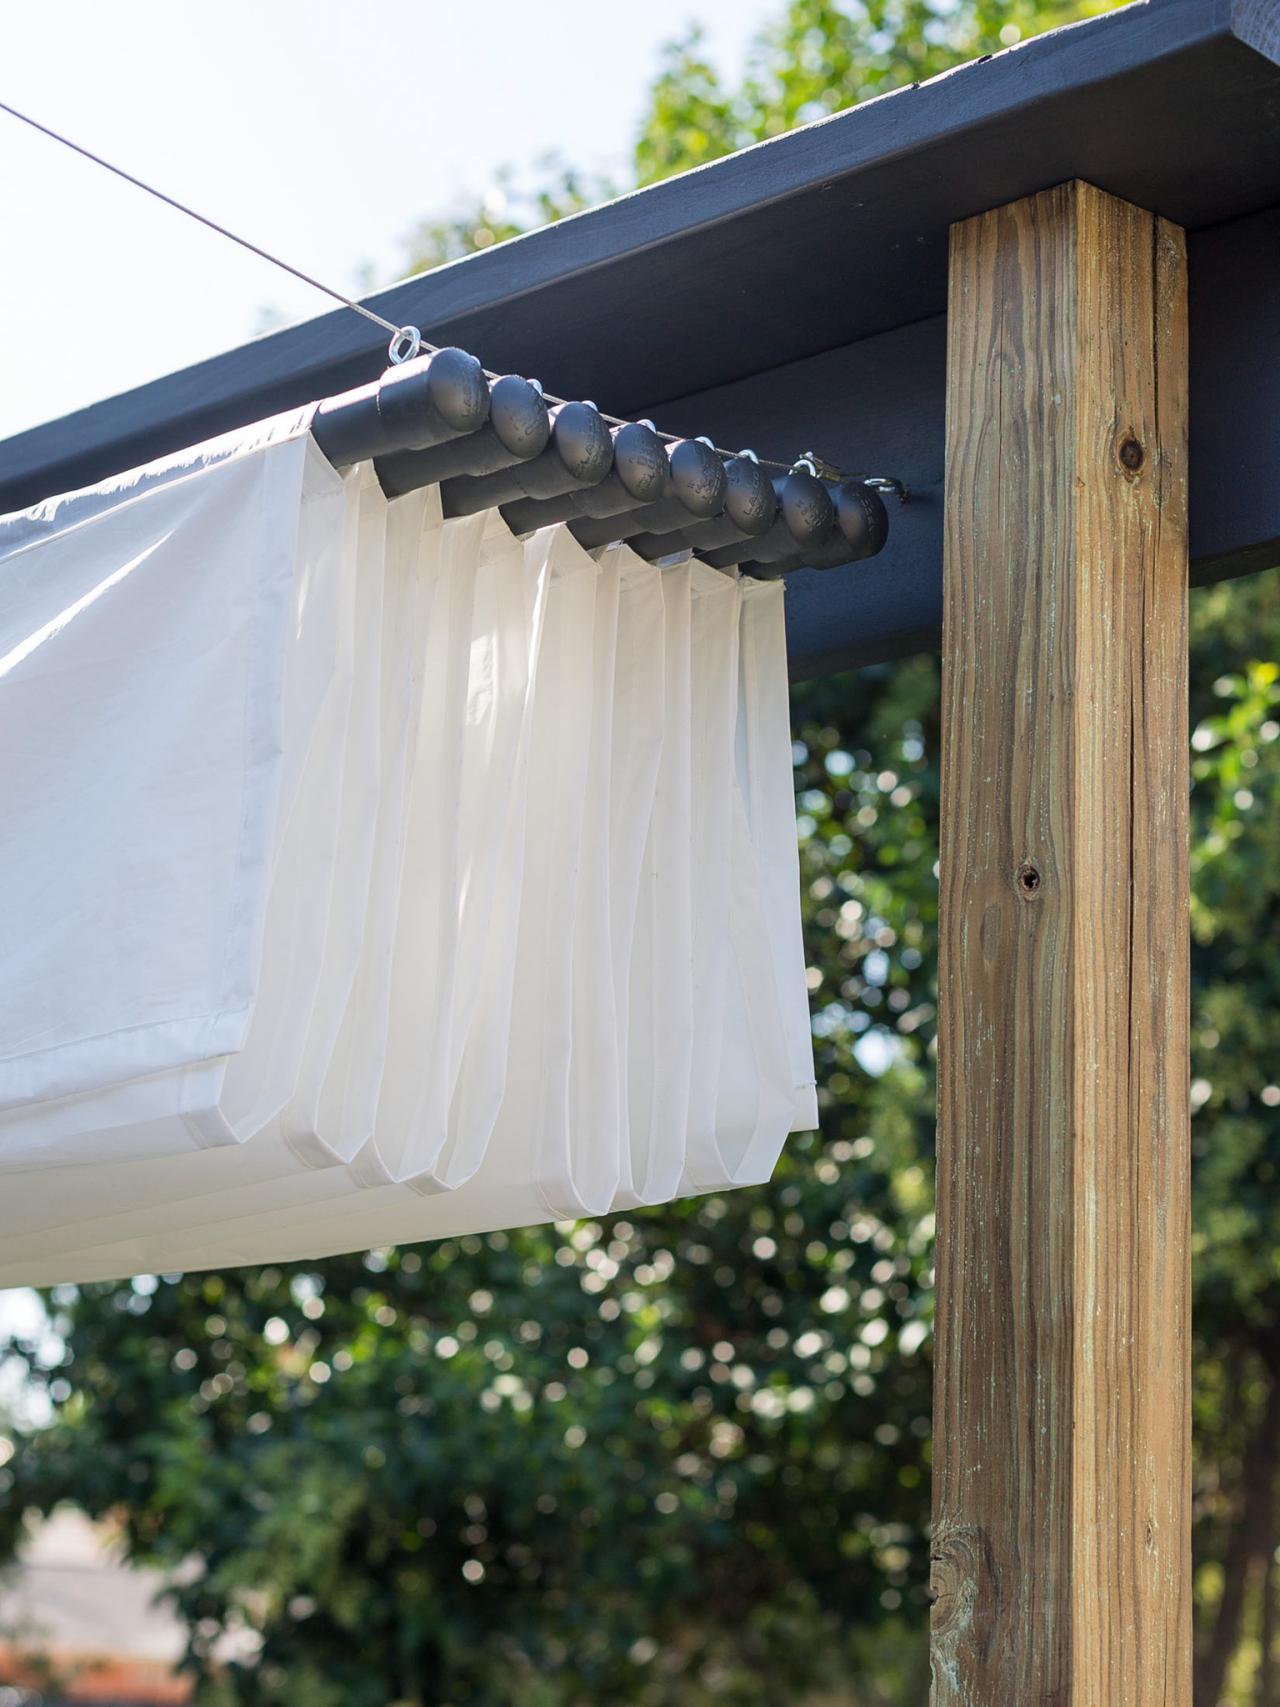 How To Build An Outdoor Canopy, Do It Yourself Outdoor Canopy